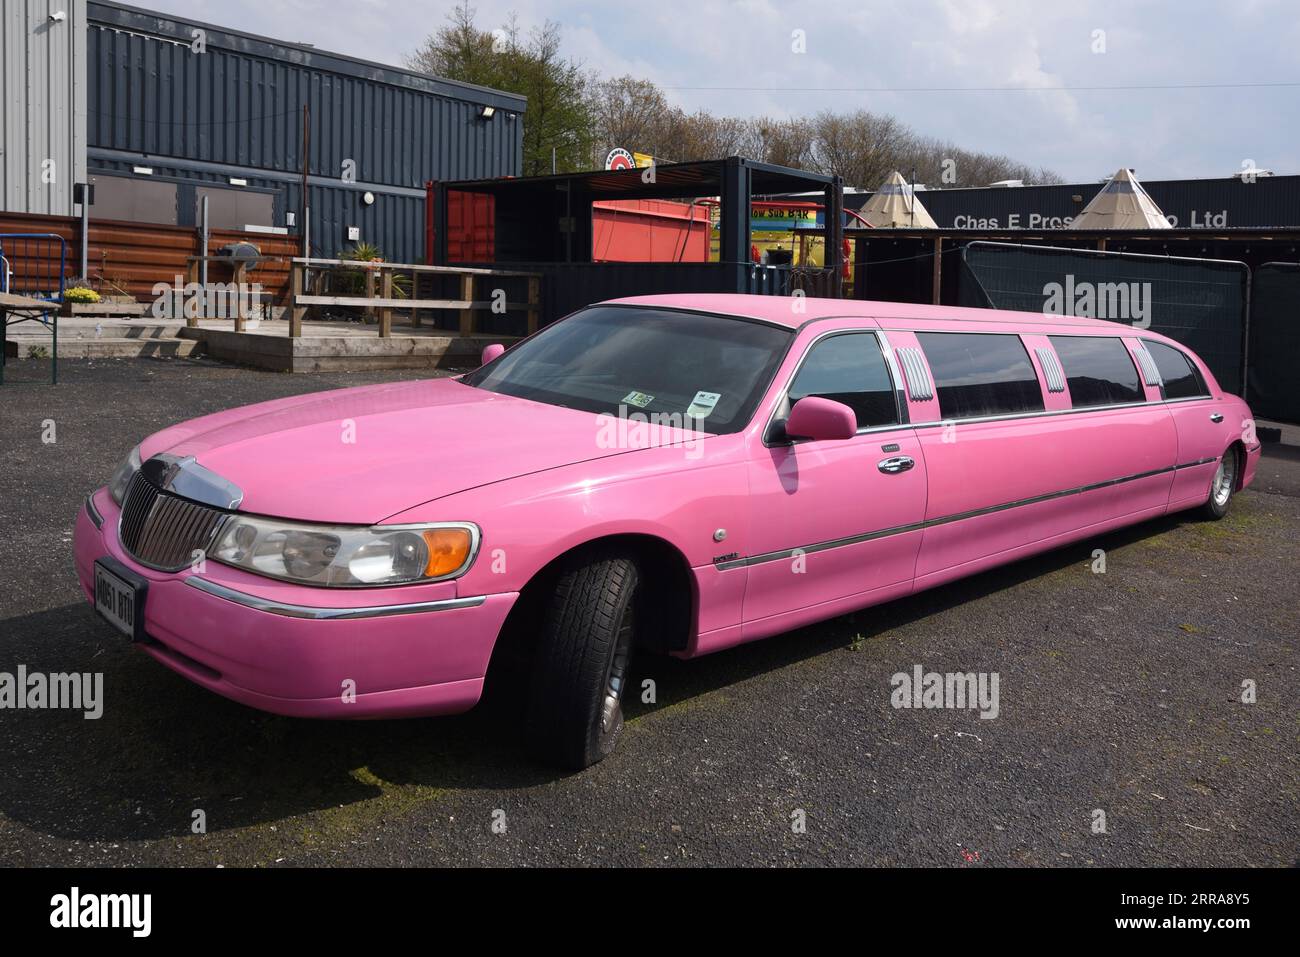 Pink Lincoln Navigator Luxury Car, Stretch Limousine or Long Wheelbase Limousine Stock Photo